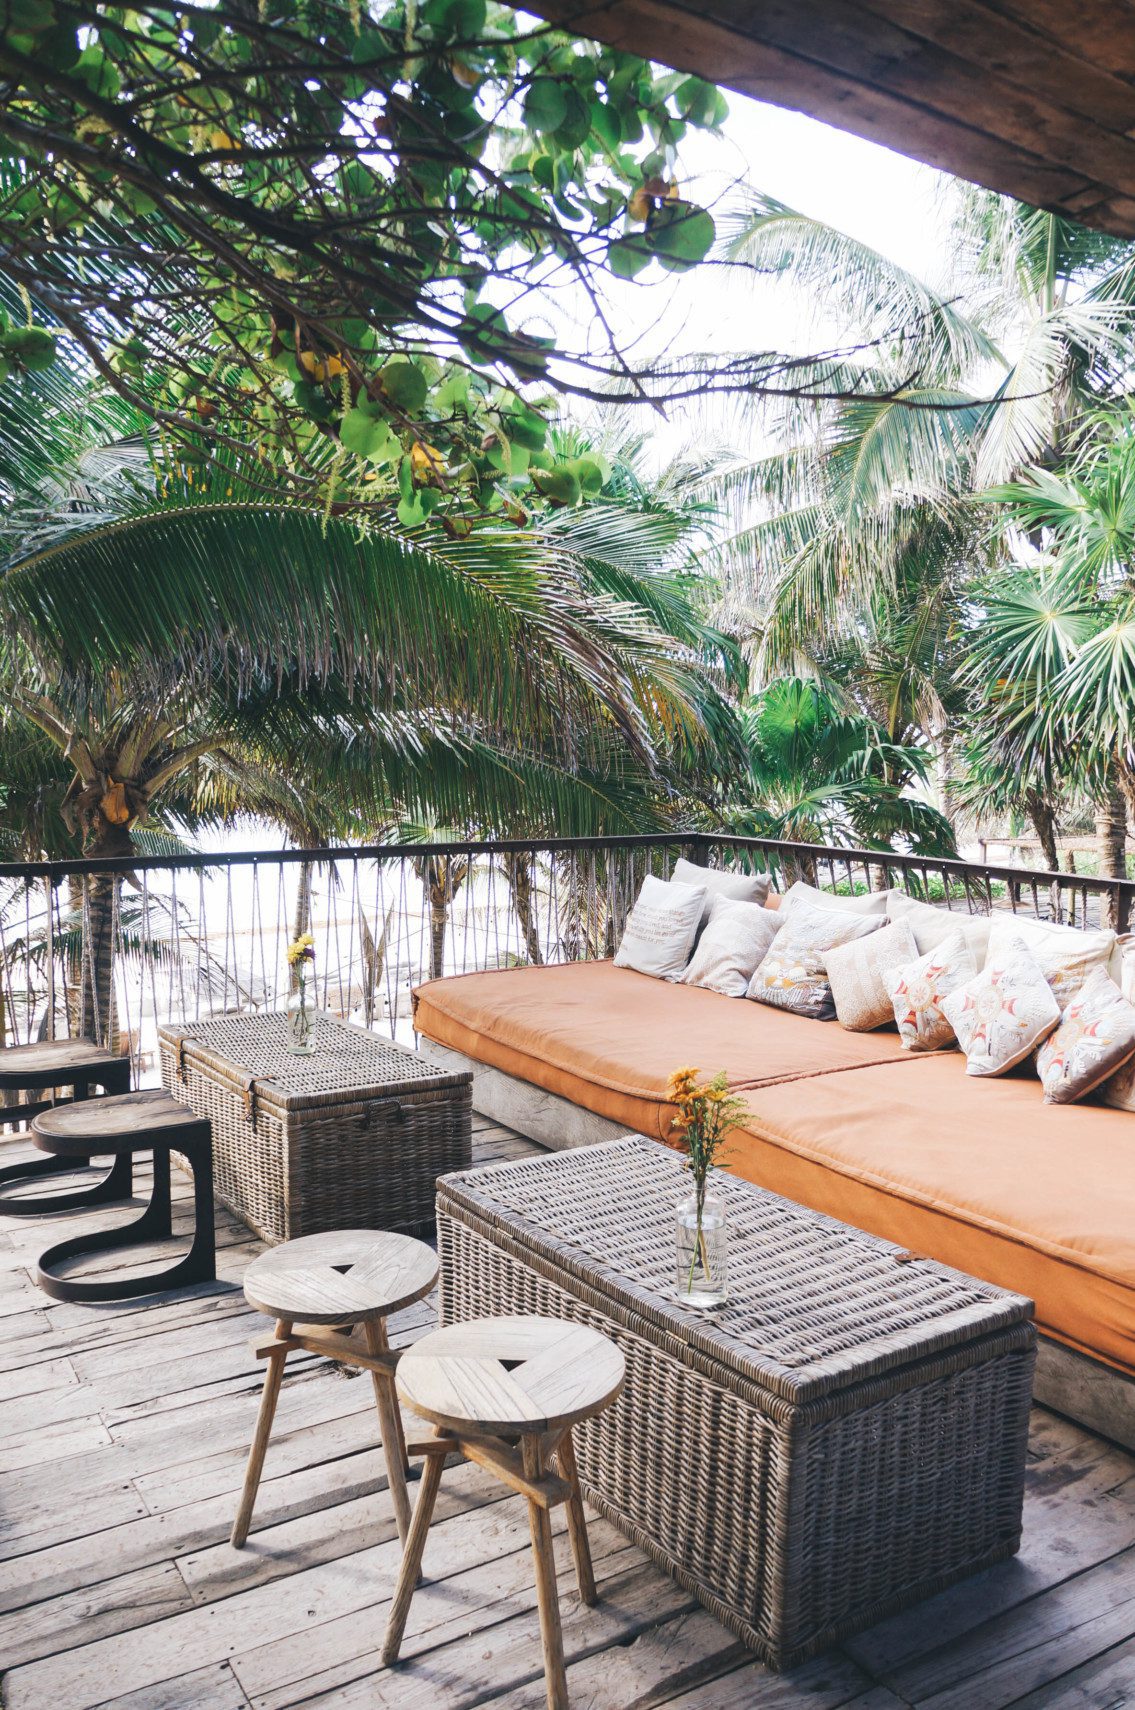 Looking for the best beach hotel in Tulum? Look no further than Be Tulum, a luxury boutique hotel with gorgeous interiors and private plunge pools off the rooms. It is my top pick for where to stay in Tulum.